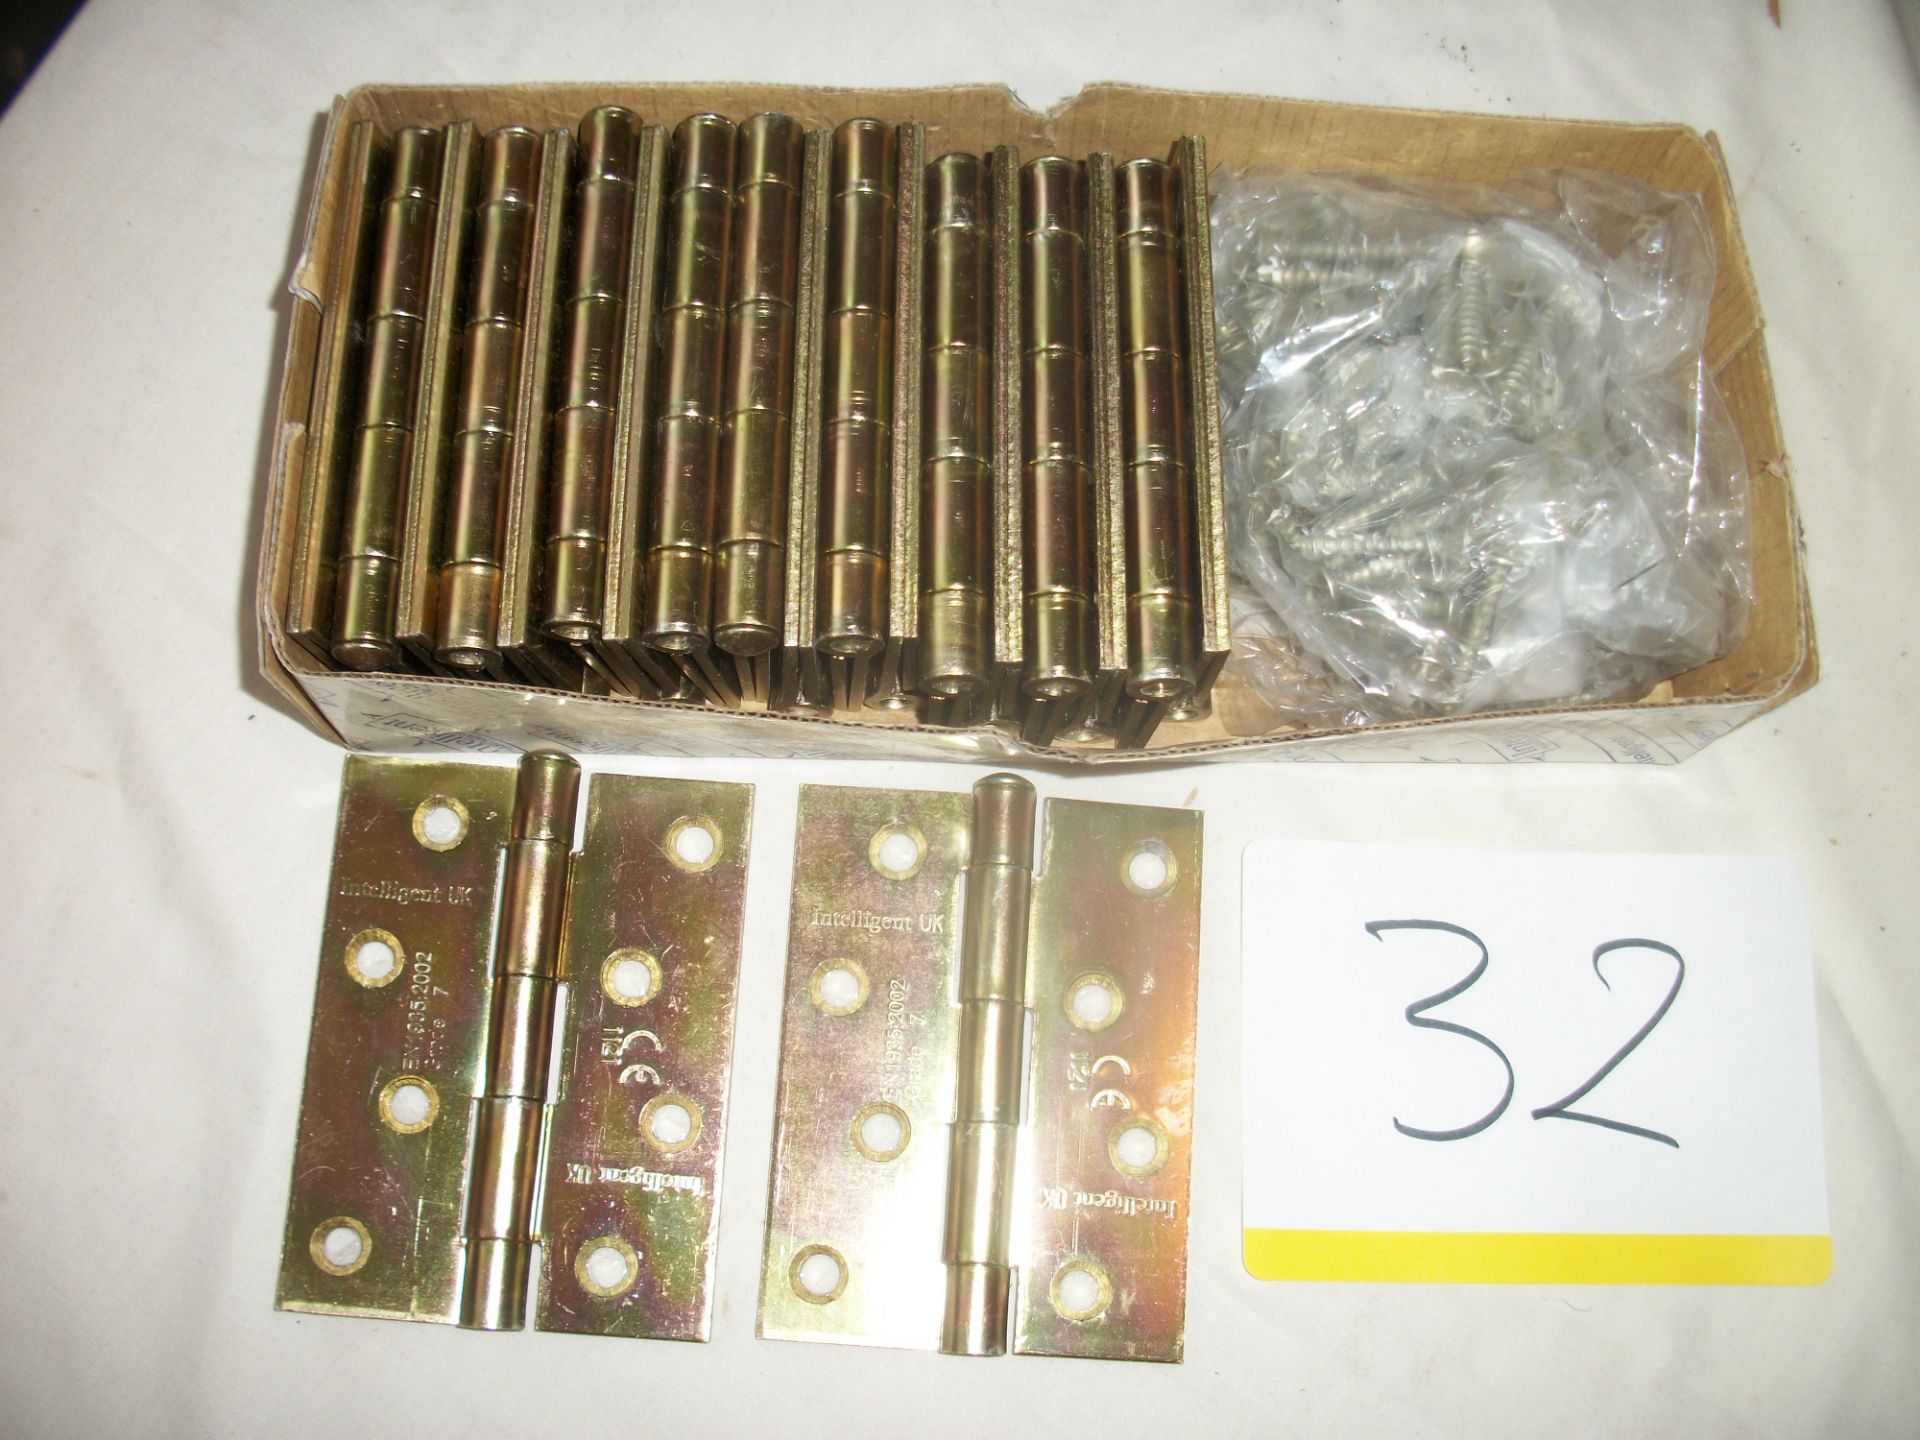 20 x Top Quality 4" Hinges including Screws